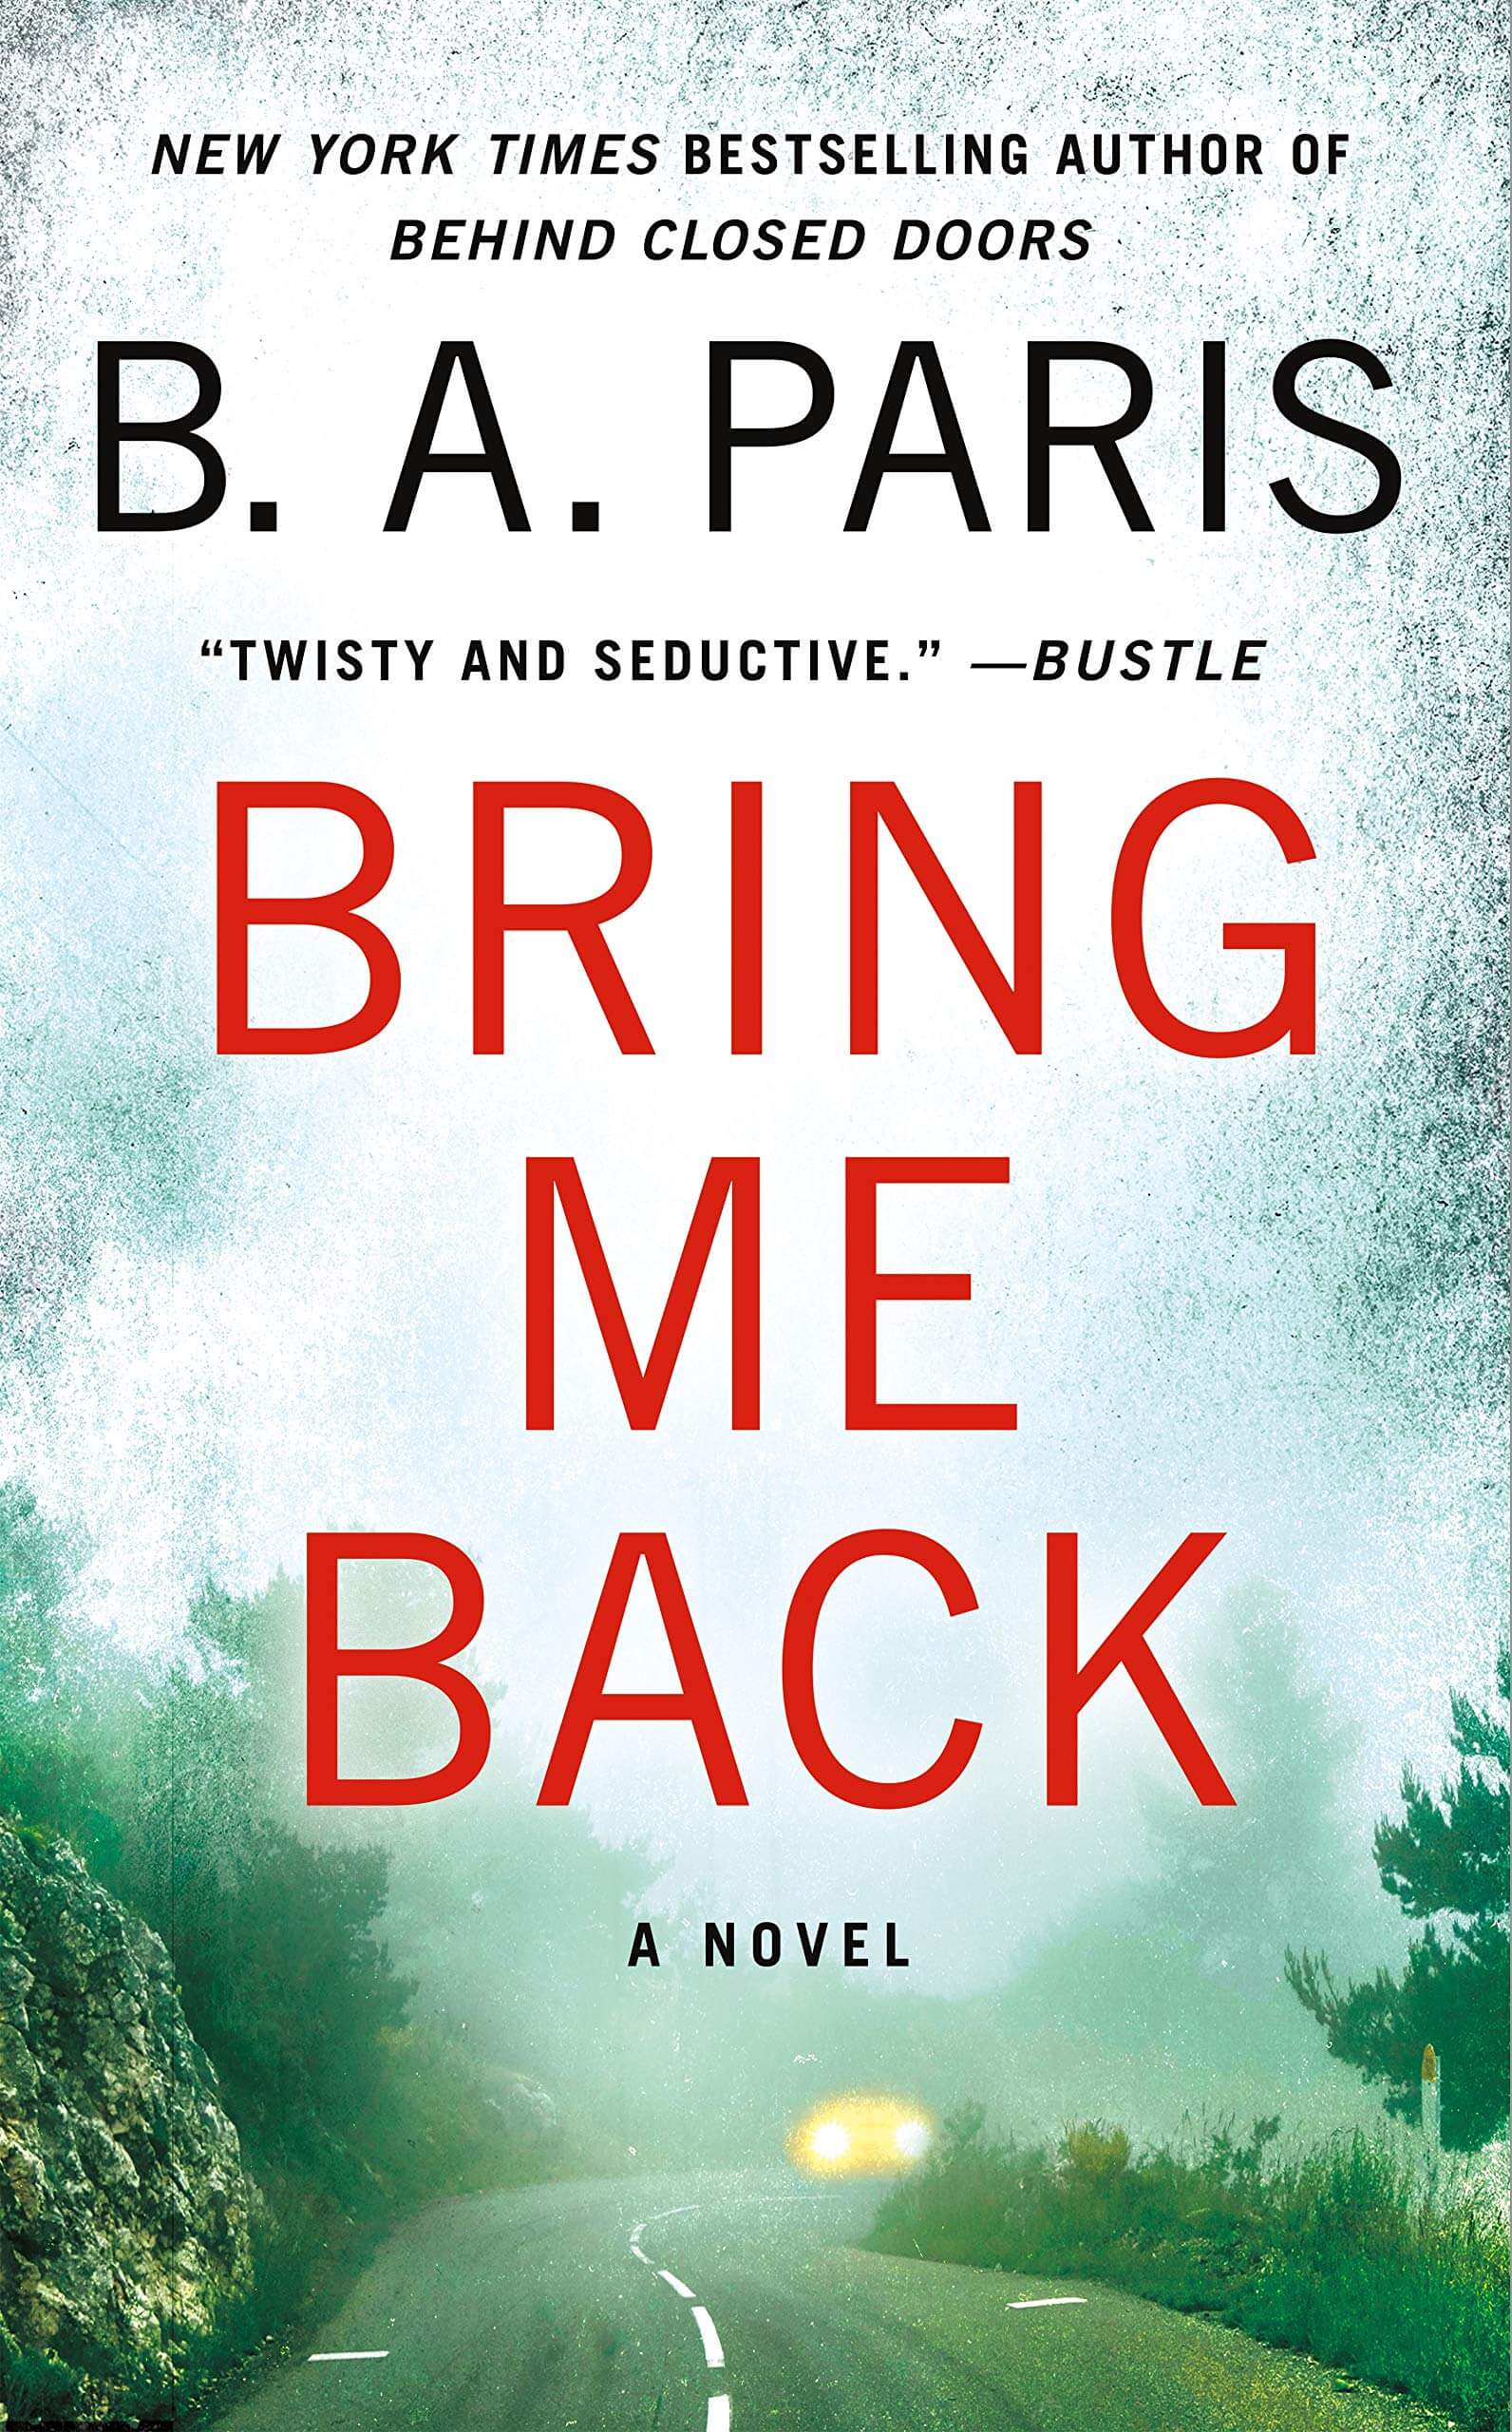 Cover of Bring Me Back by B.A. Paris